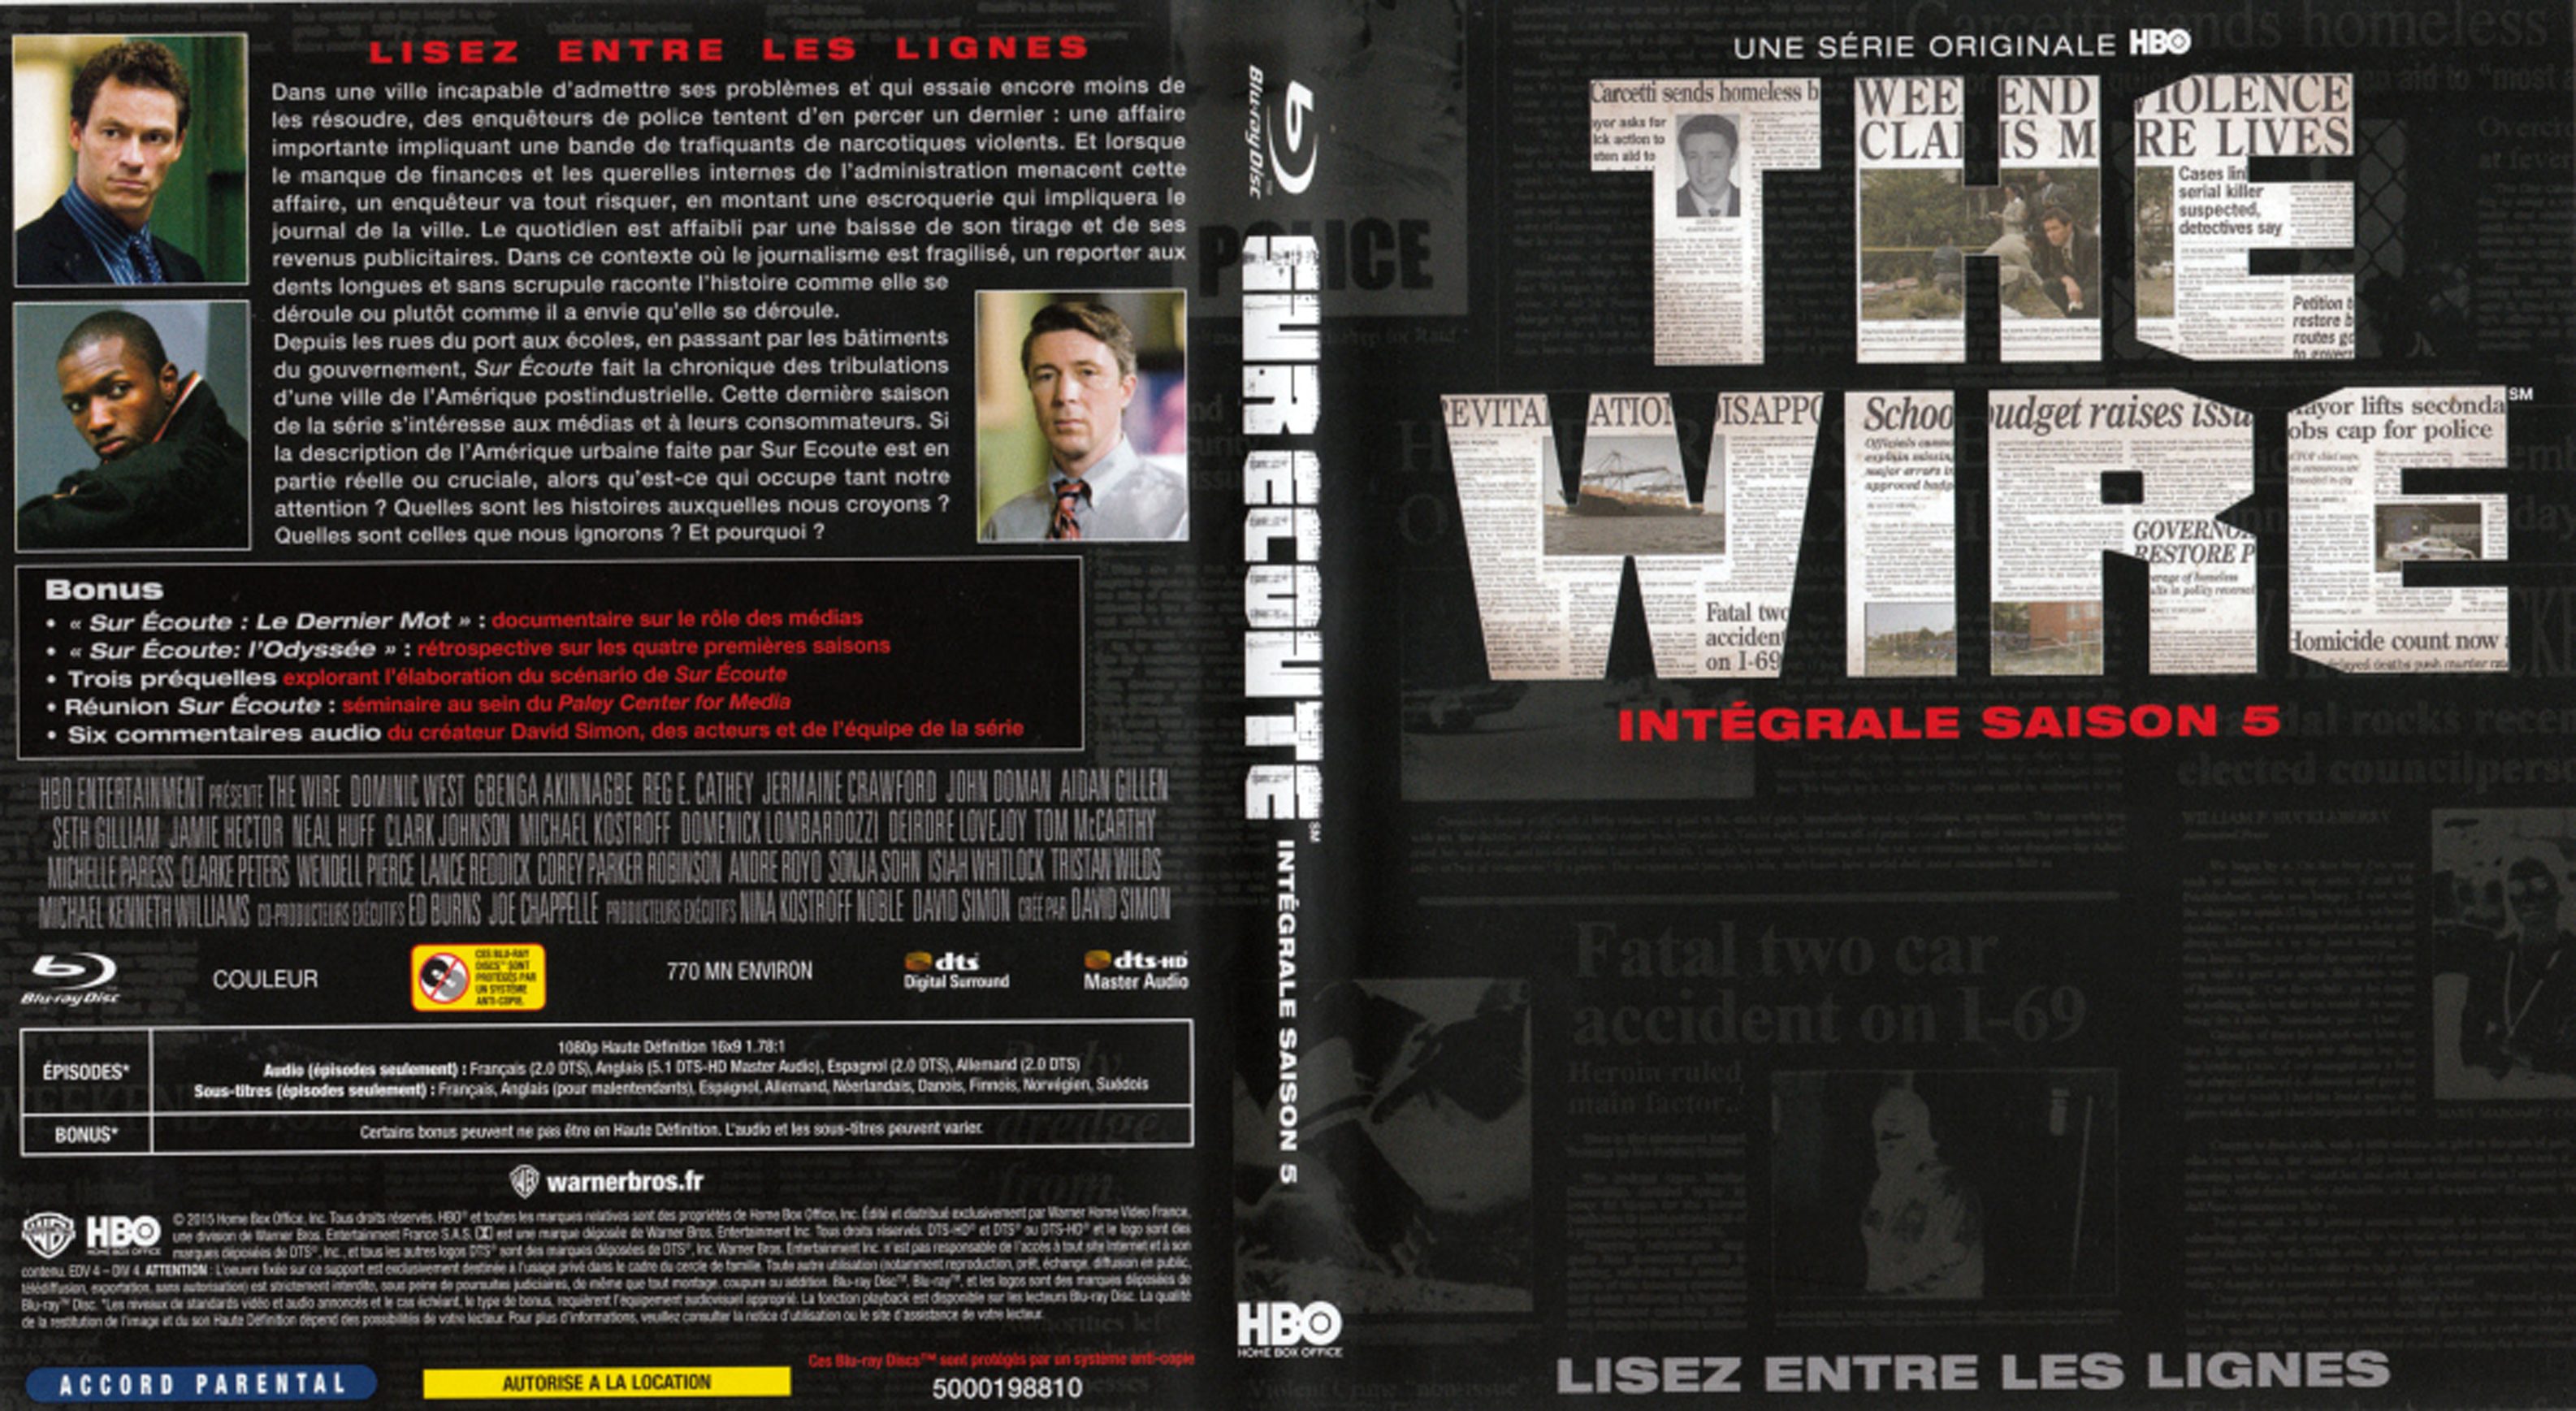 Jaquette DVD The wire - Sur coute Saison 5 (BLU-RAY)